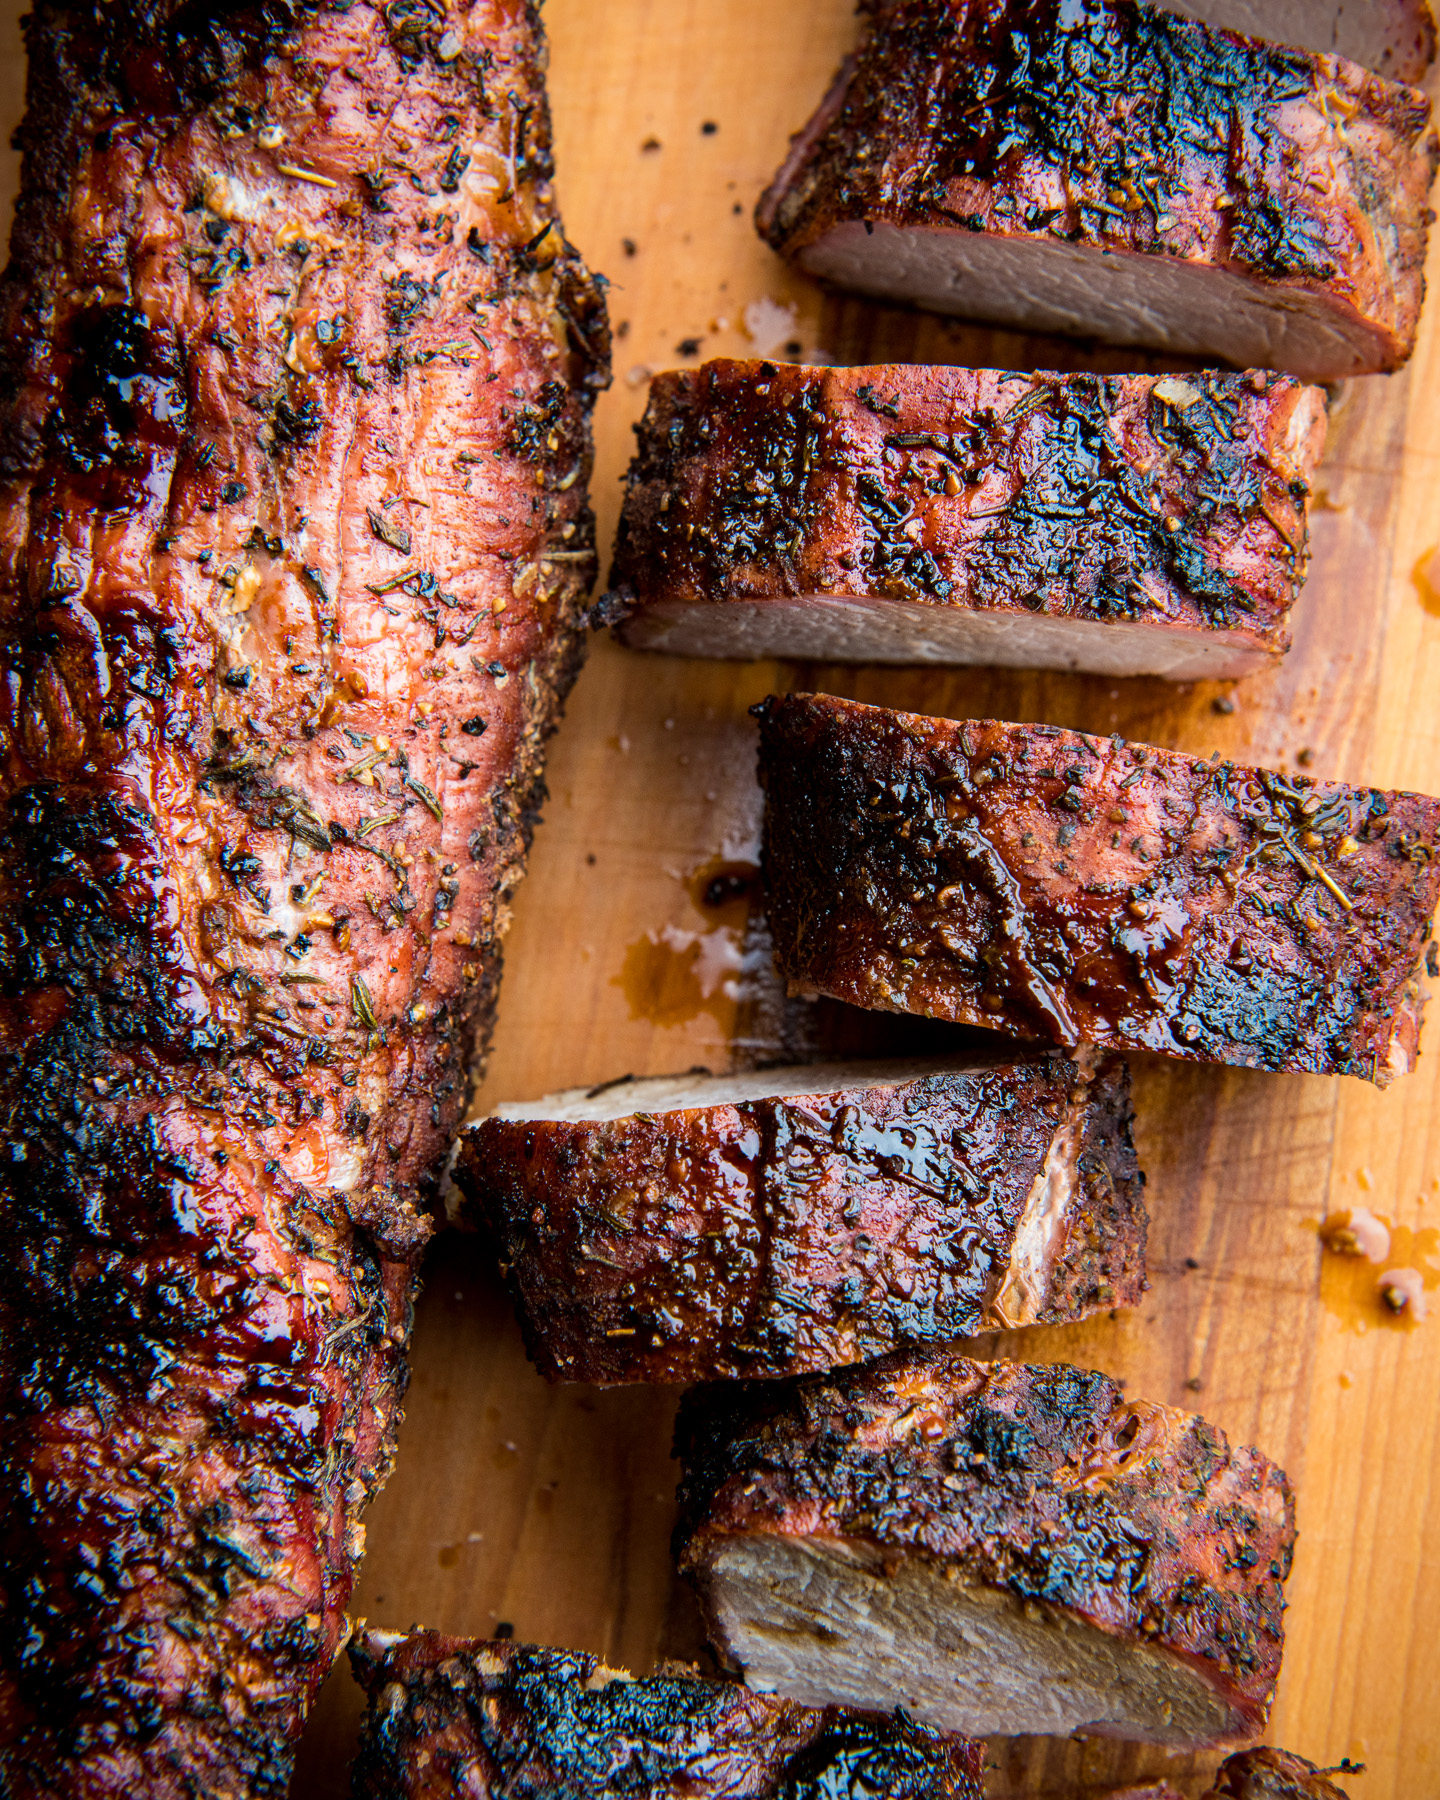 Grilled Pork Tenderloin with Sweet and Spicy Seasoning Blend